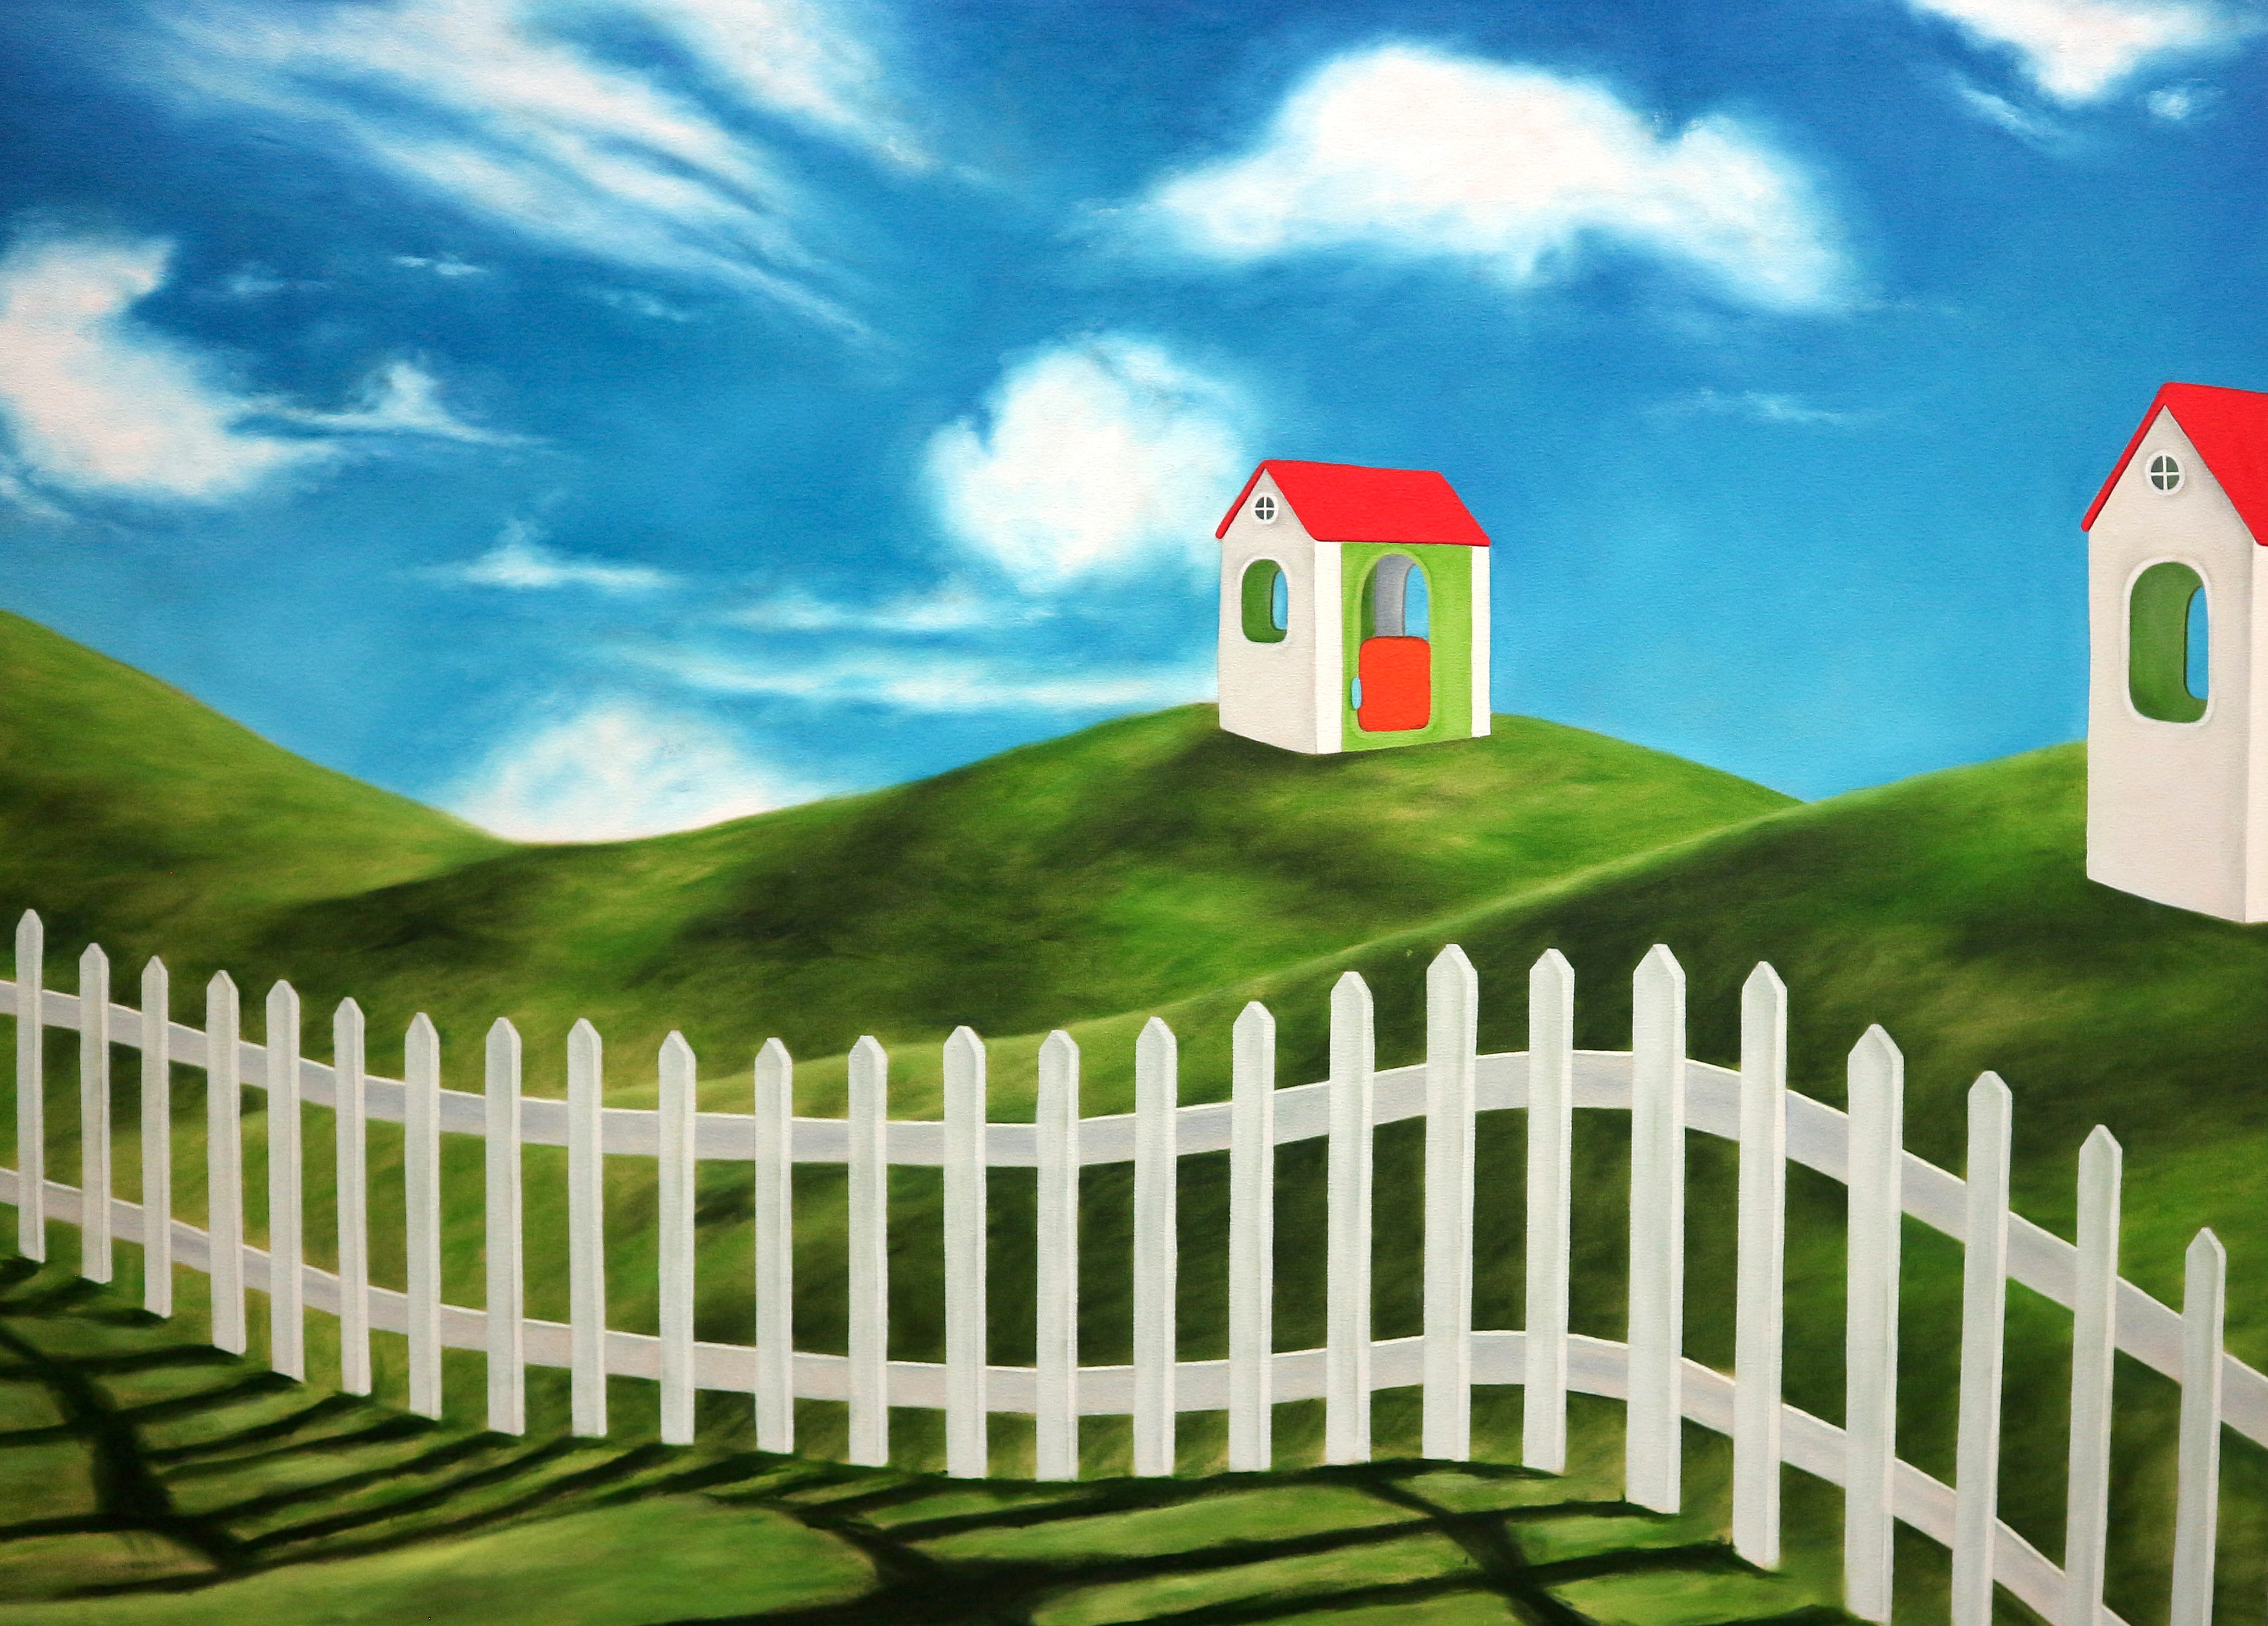 A painting of a grassy landscape containing a white fence and children's playhouses.